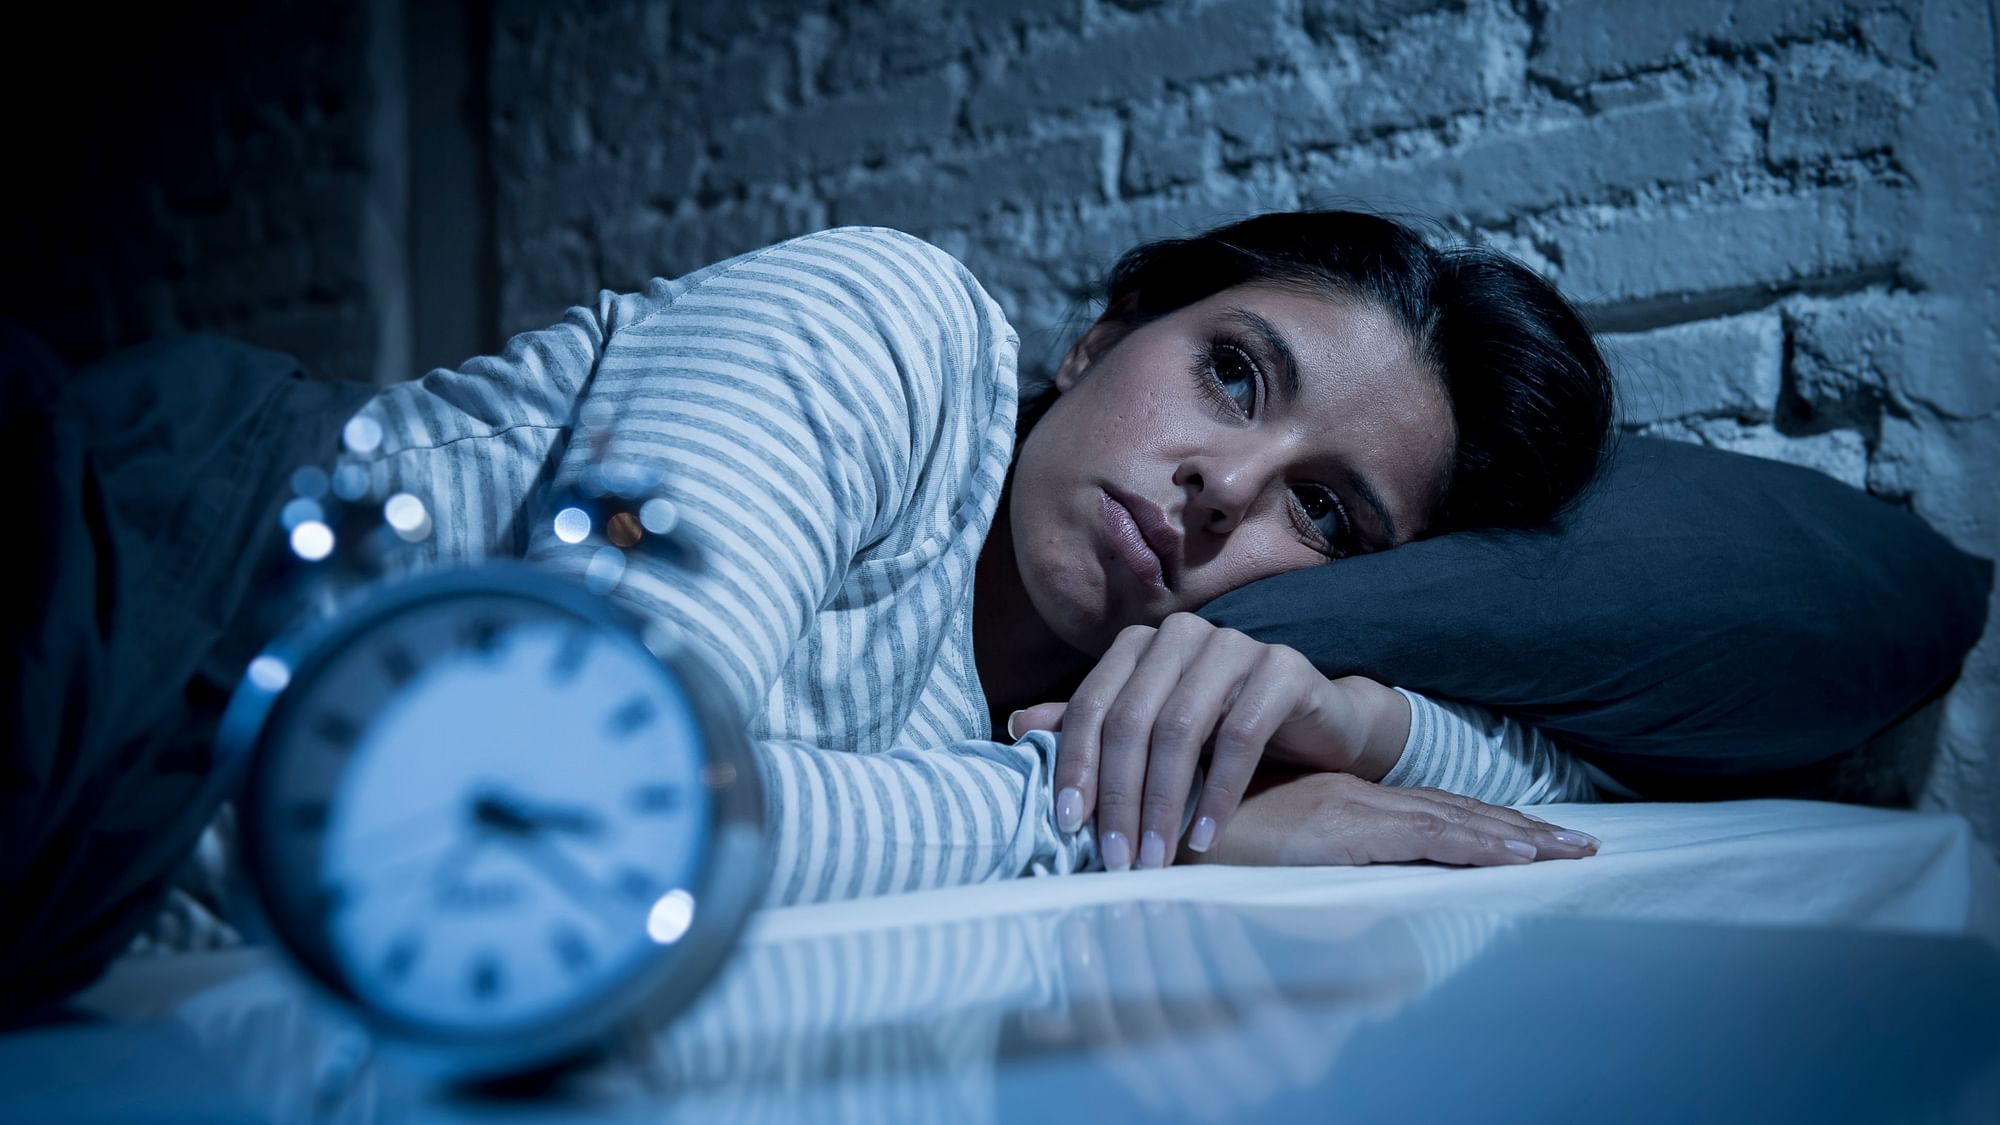 Losing just one night of sleep fuels brain proteins linked to the development of Alzheimer’s disease.